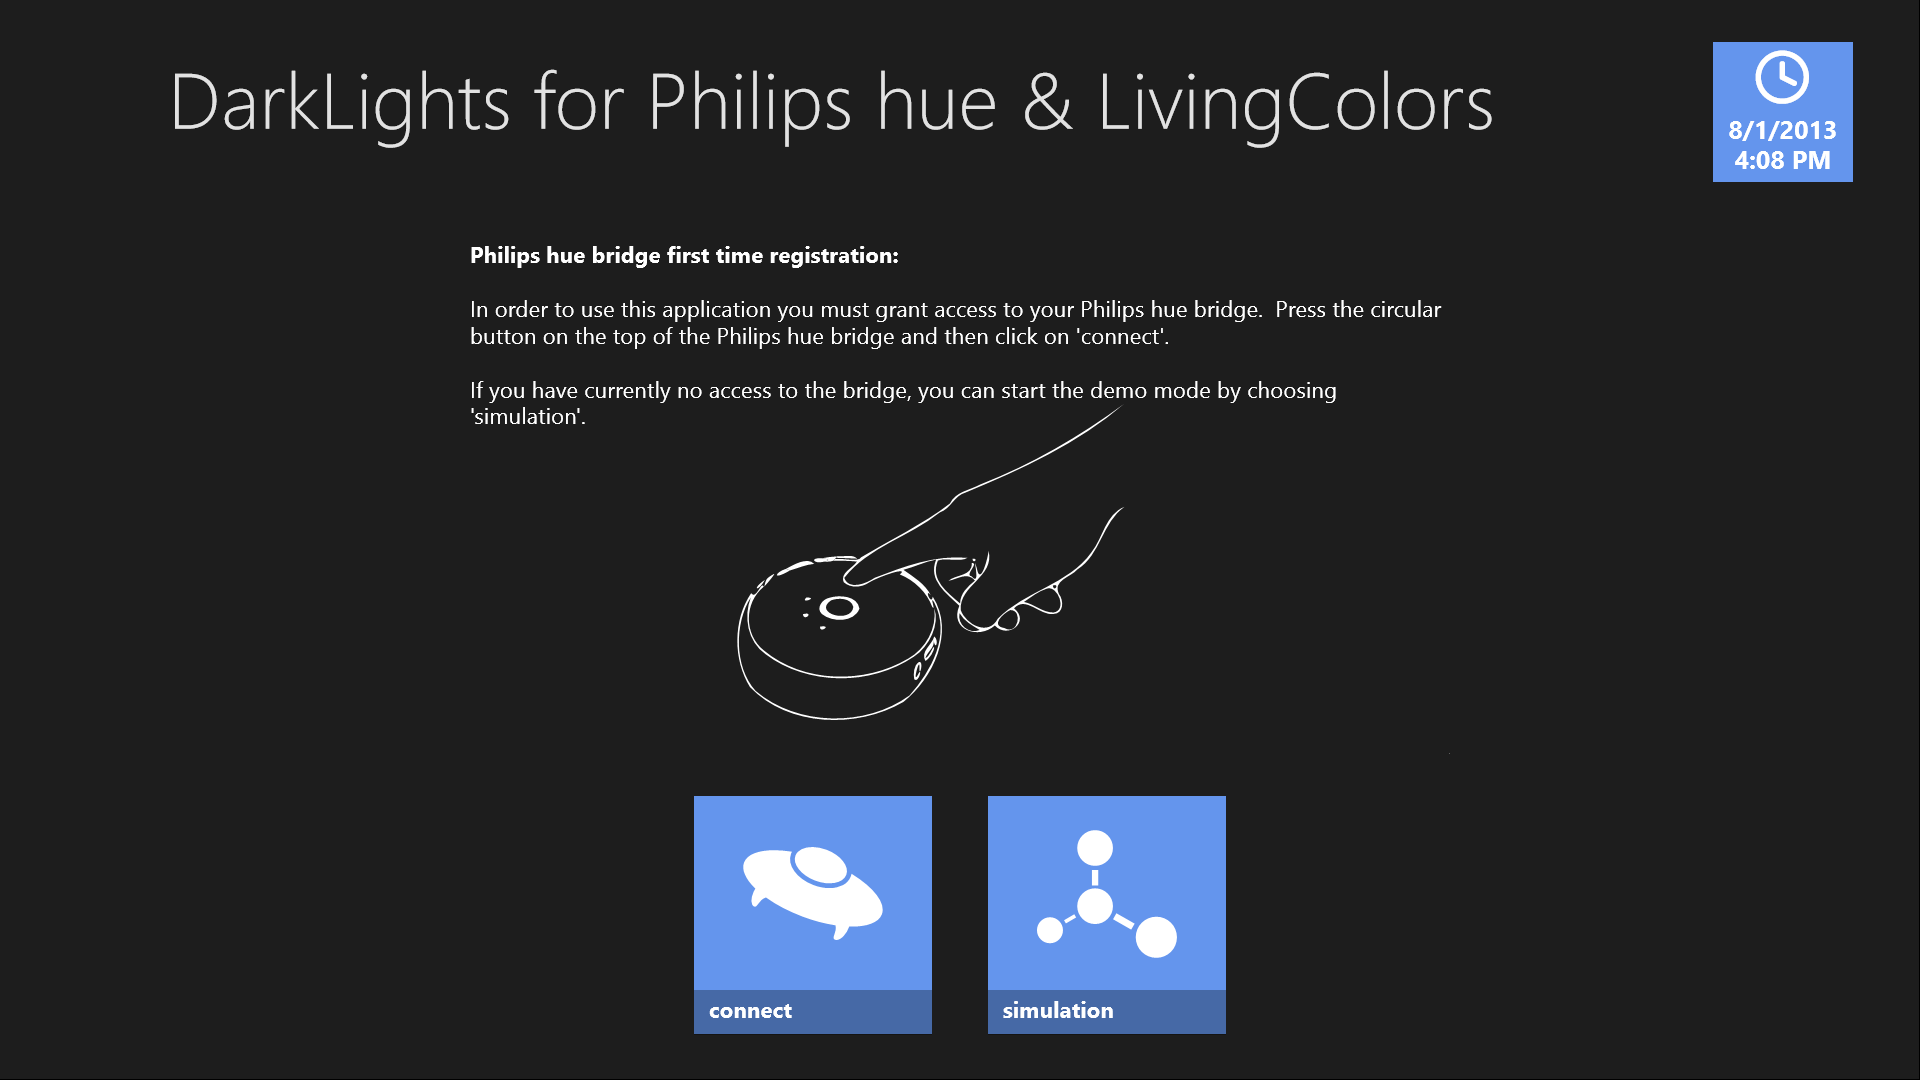 To use this app, you must connect to a Philips hue bridge. Or you just start a simulation.